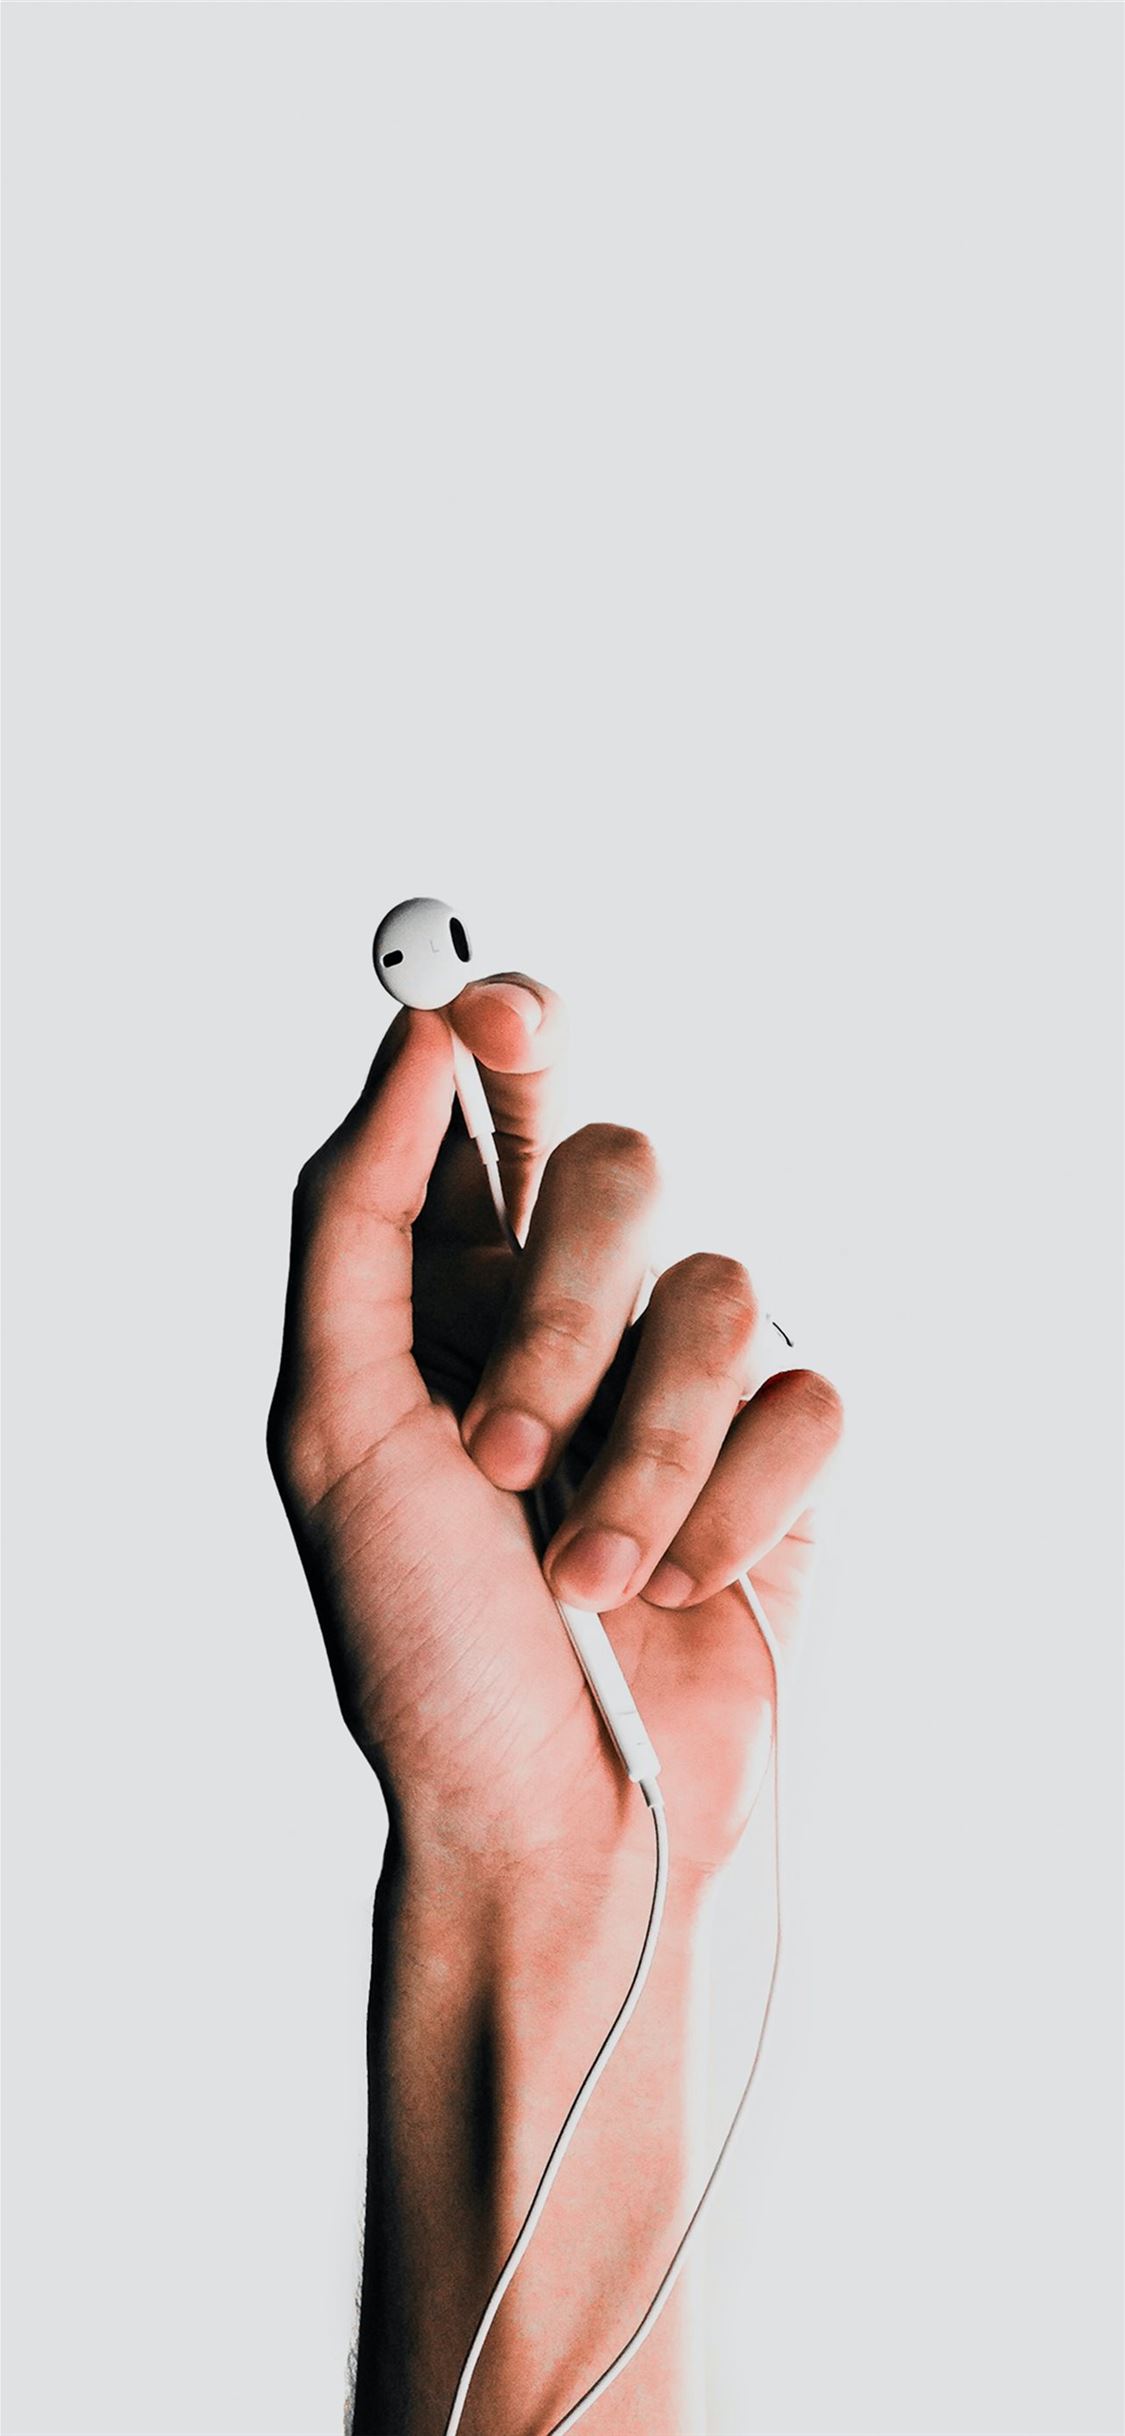 person holding Apple EarPods iPhone 11 Wallpaper Free Download